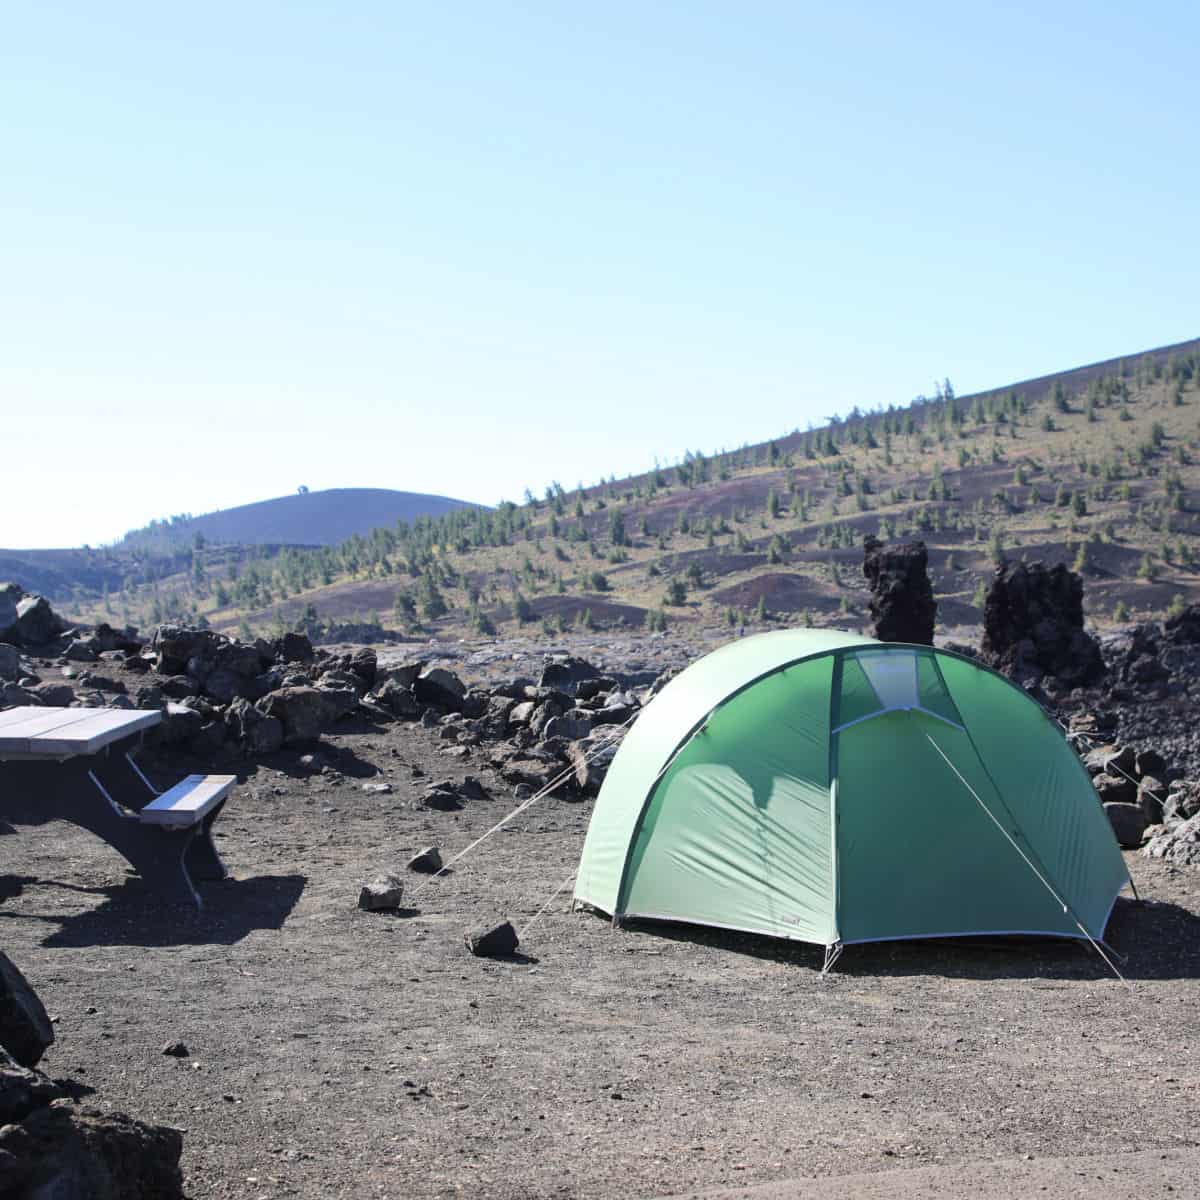 Camping at the Lava Flow Campground at Craters of the Moon National Monument and Preserve